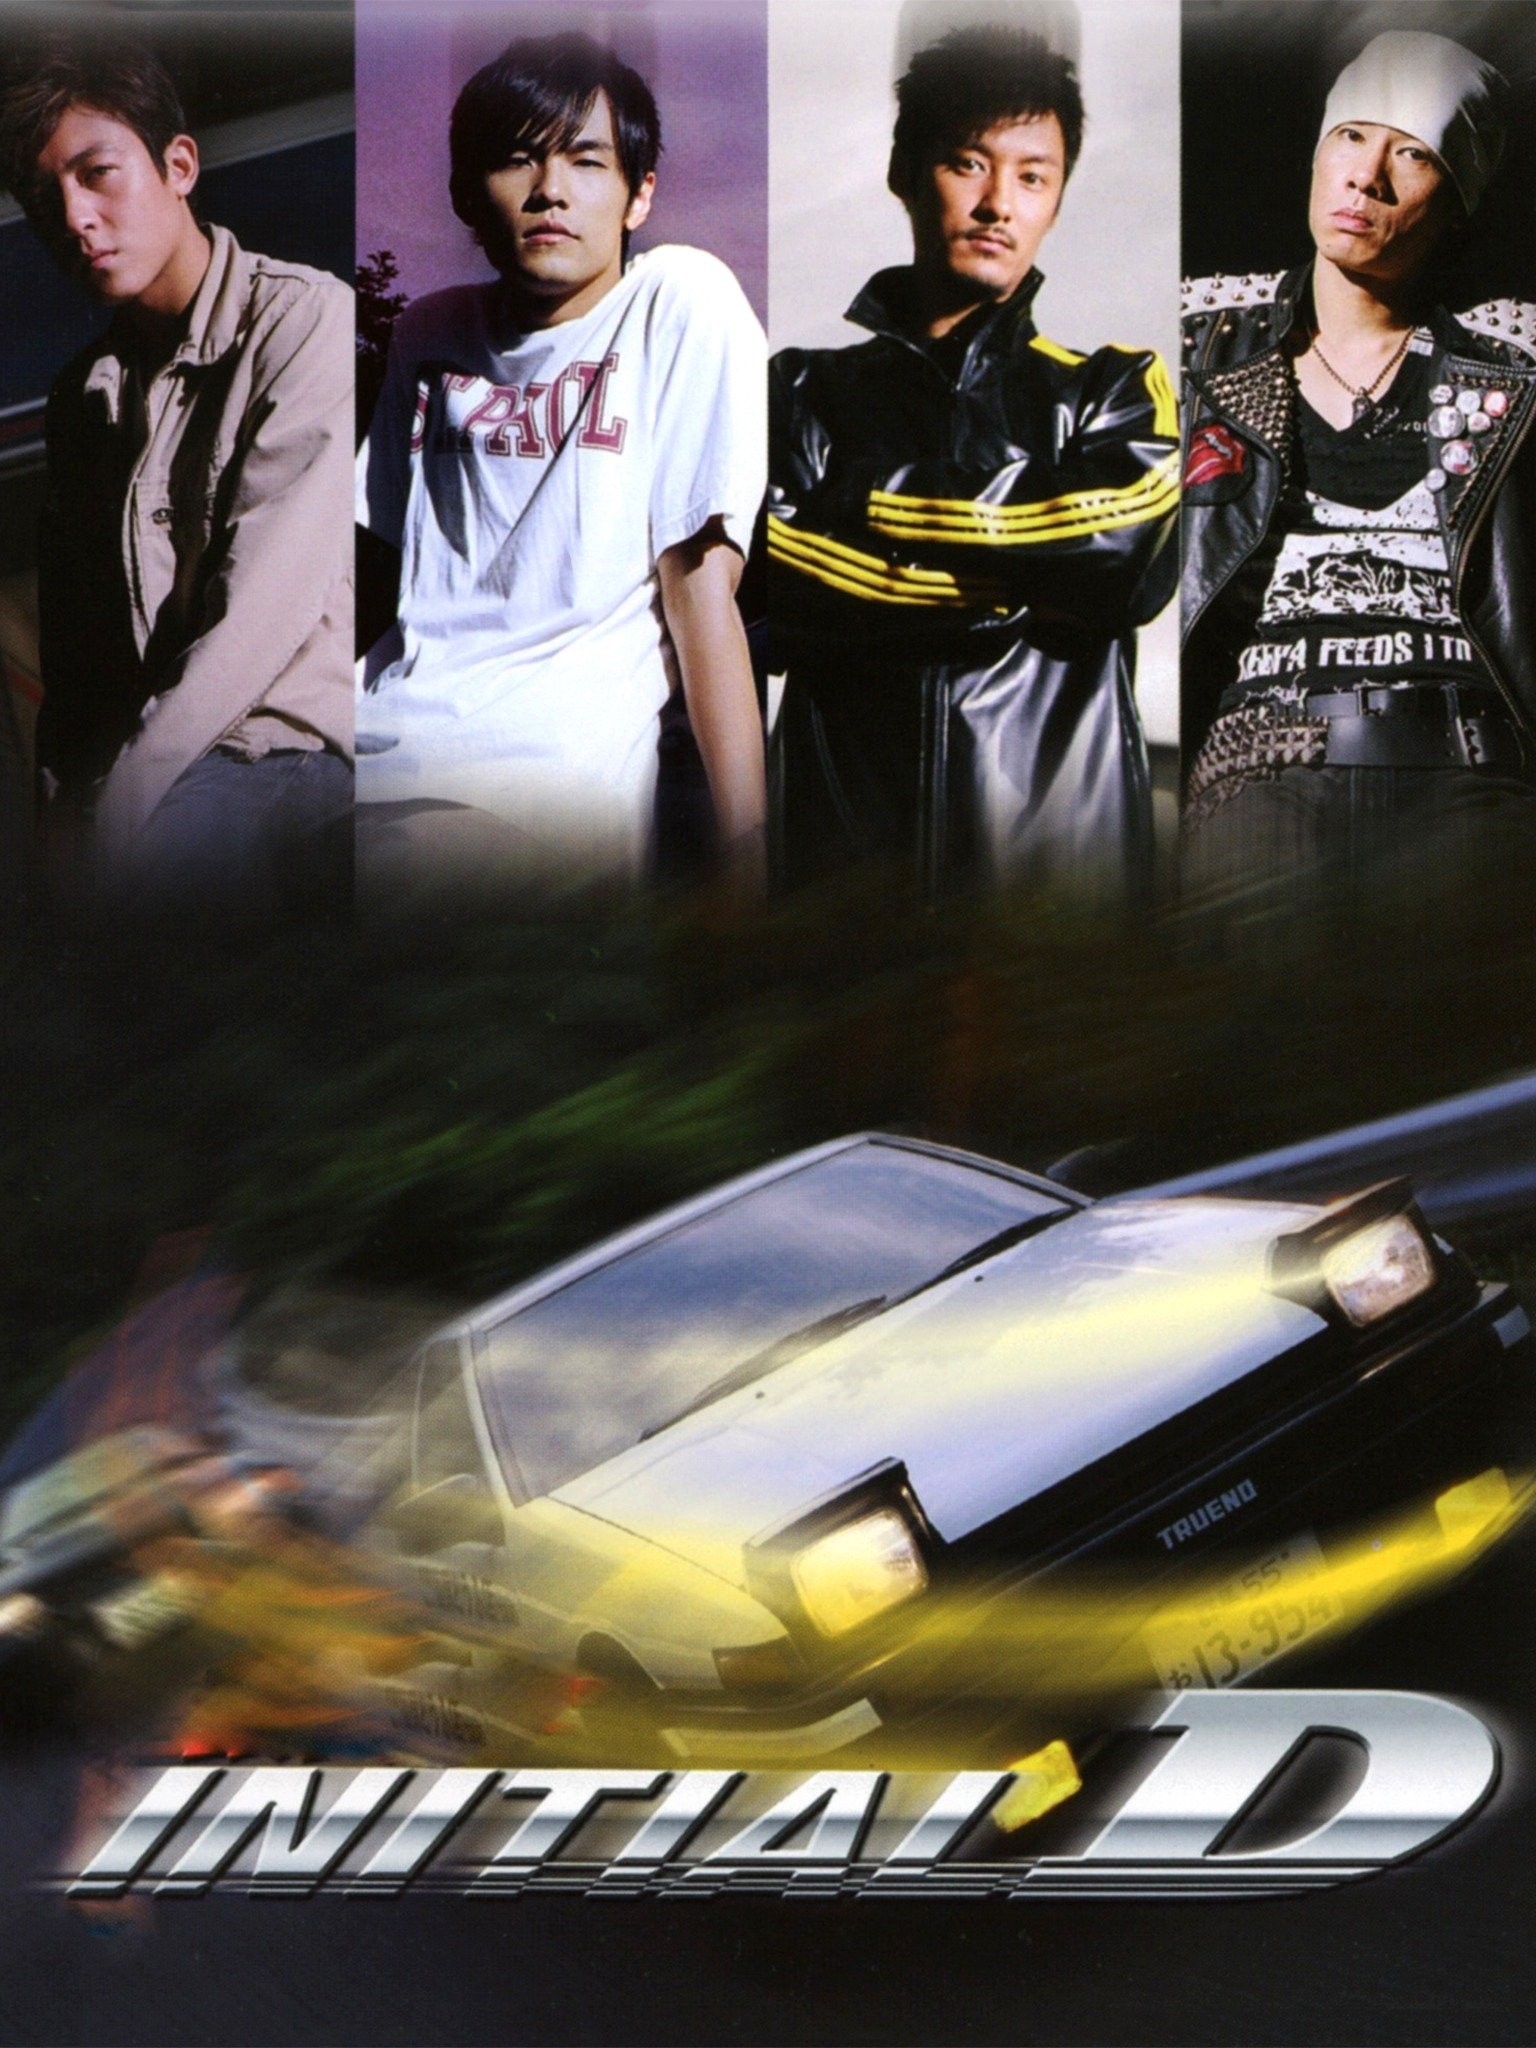 Initial D World - Central Anime has just released all four